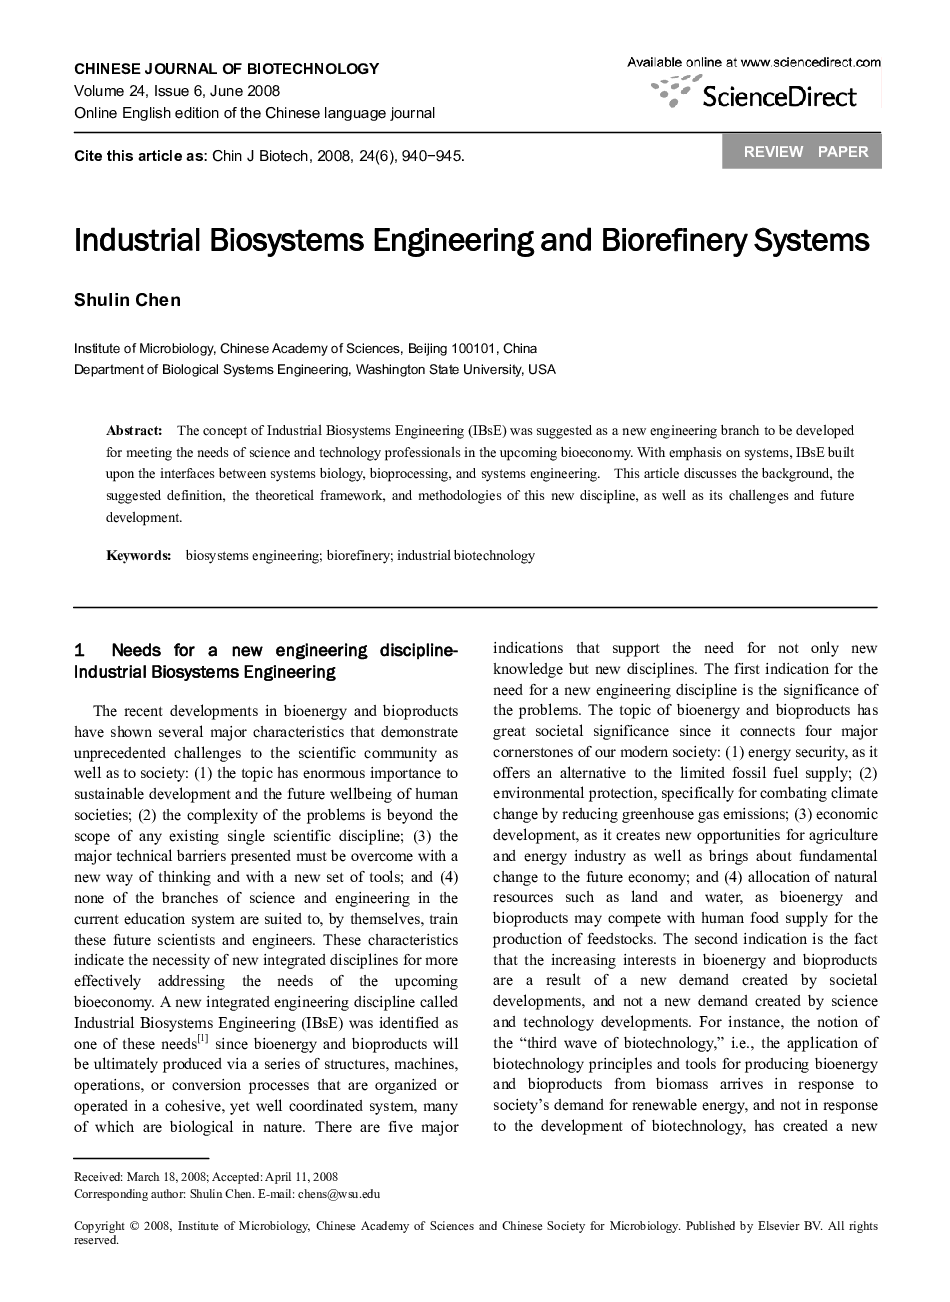 Industrial Biosystems Engineering and Biorefinery Systems